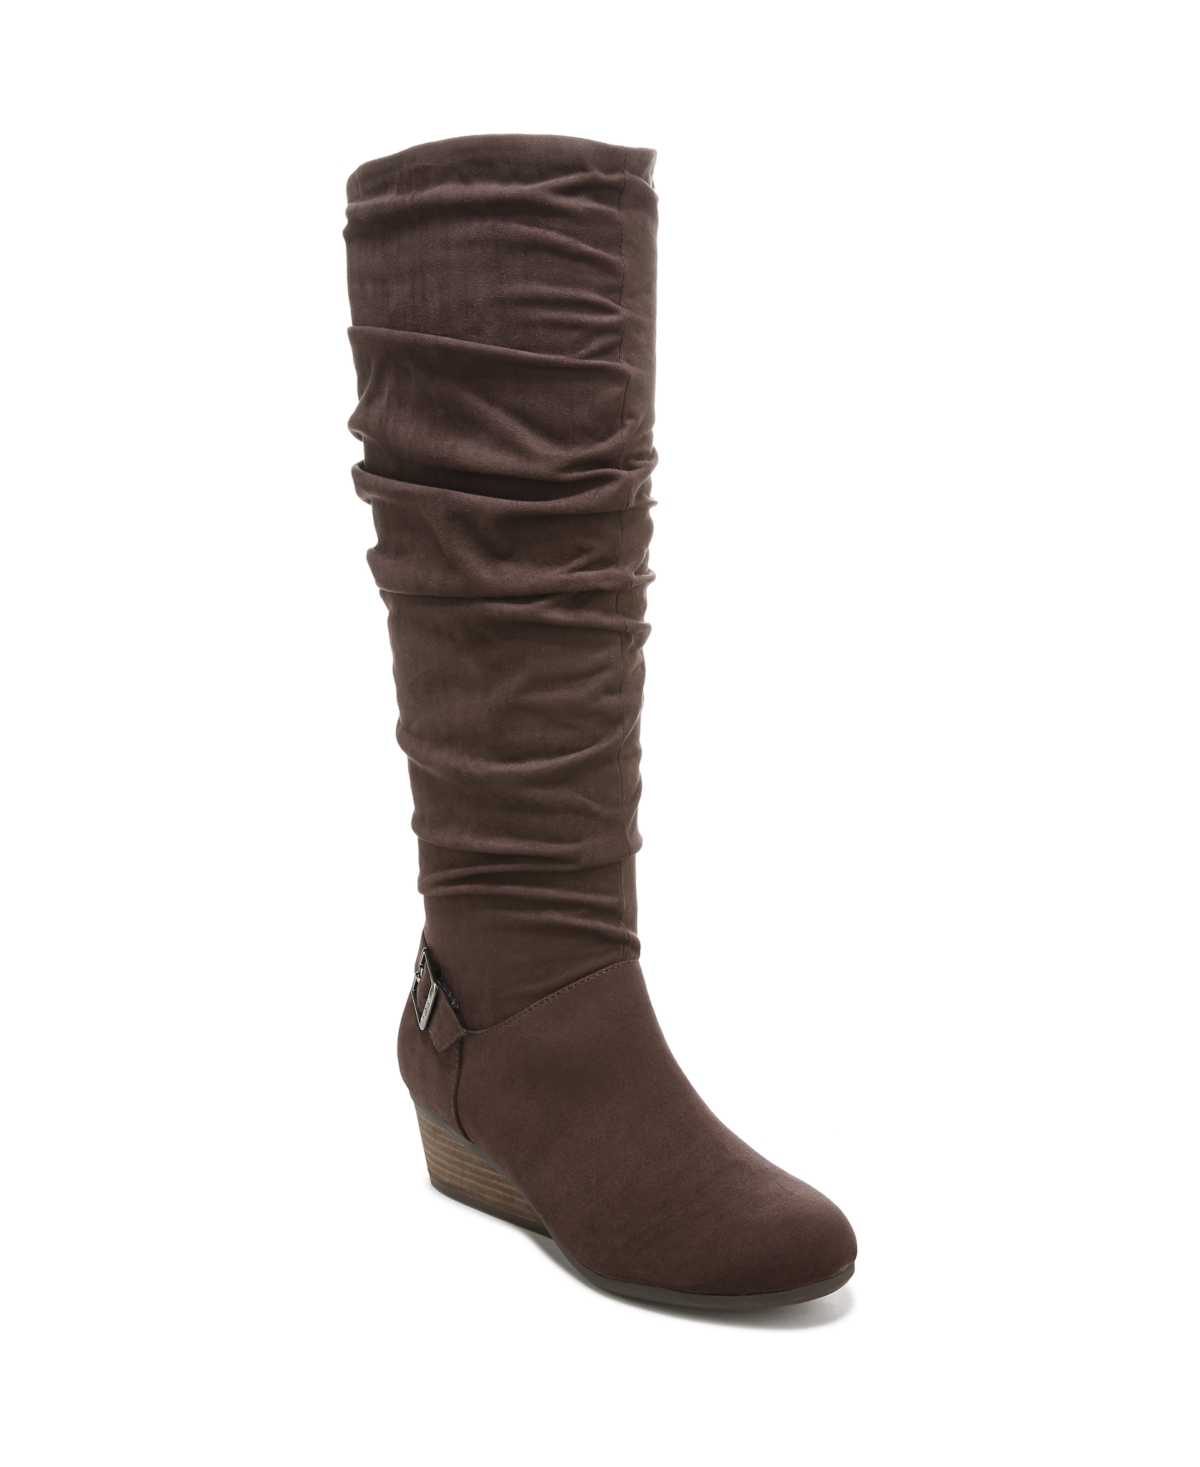 UPC 736715606380 product image for Dr. Scholl's Women's Break Free High Shaft Boots Women's Shoes | upcitemdb.com